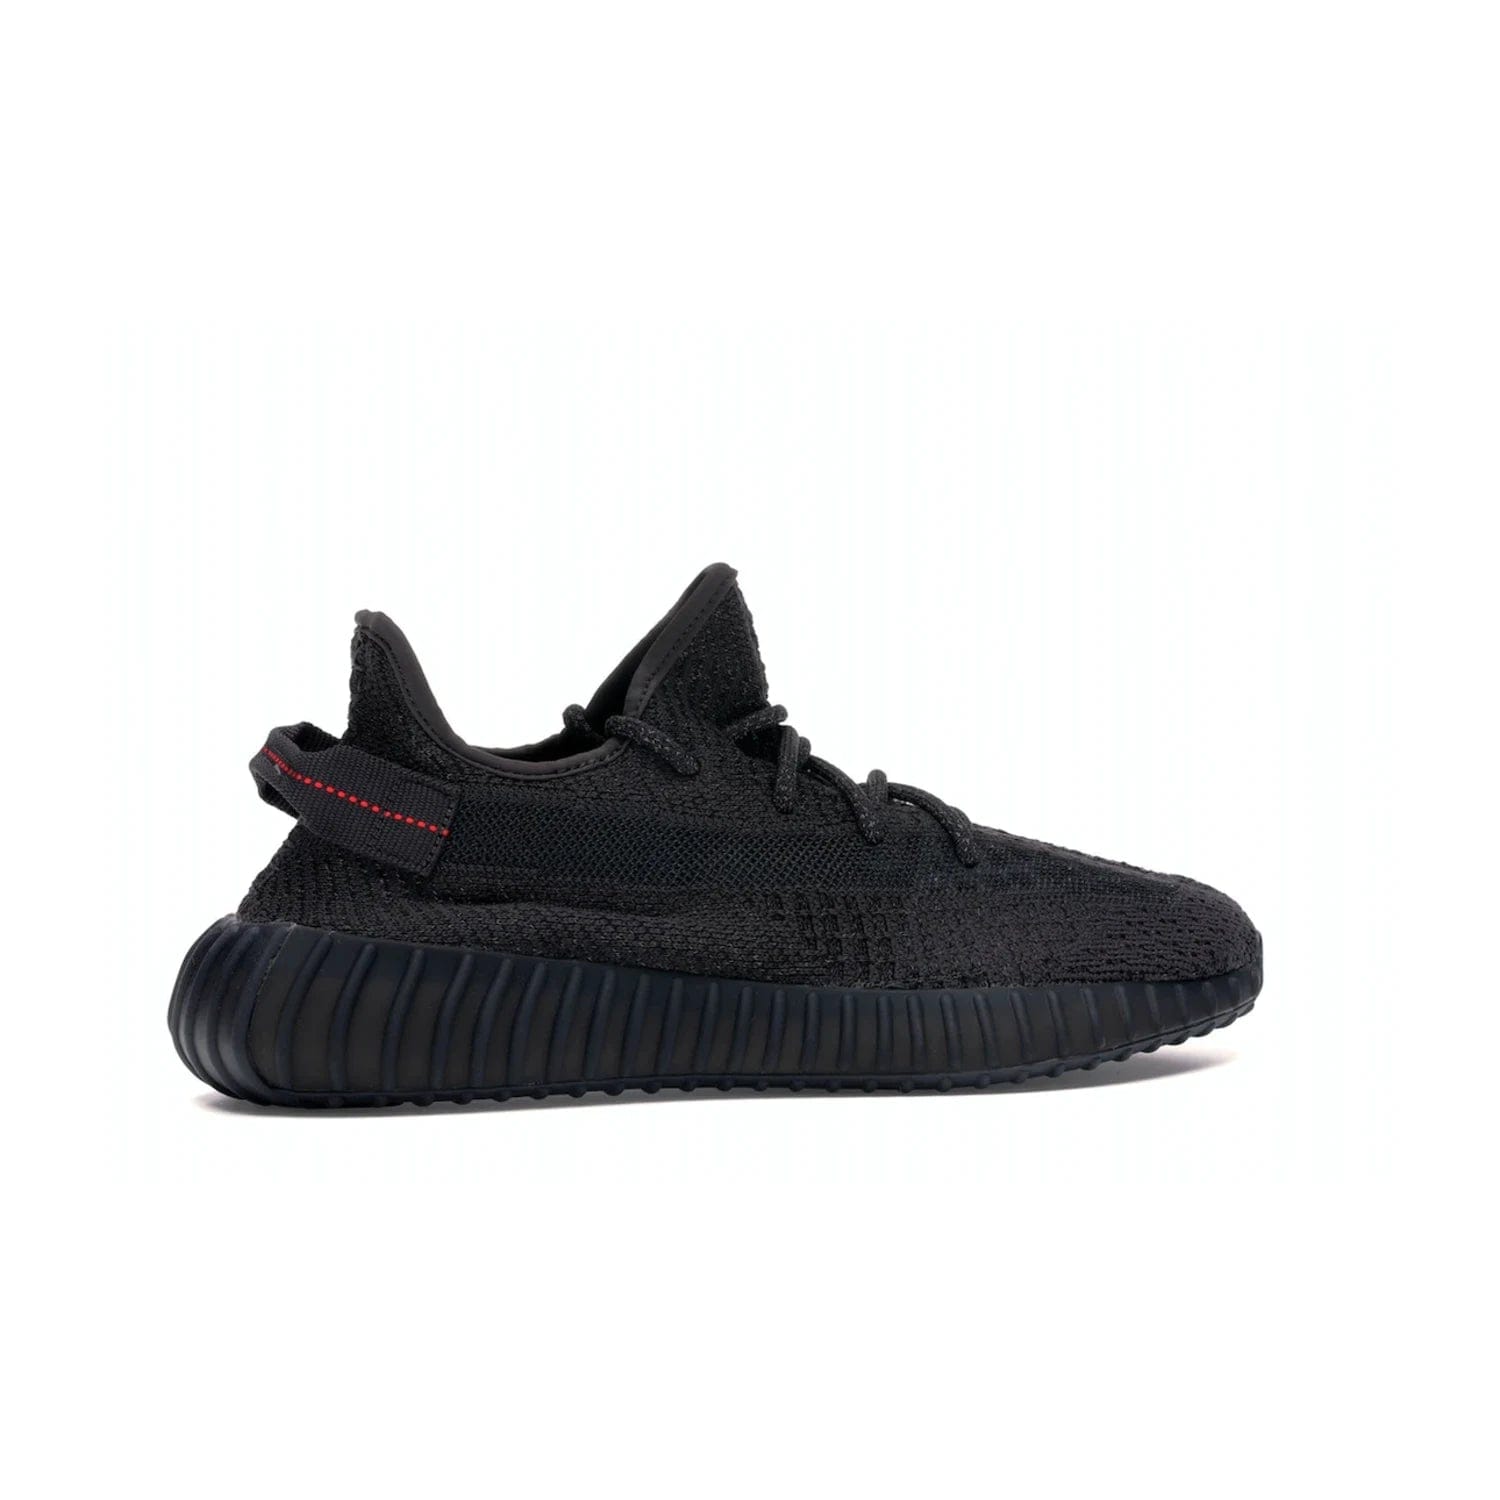 adidas Yeezy Boost 350 V2 Static Black (Reflective) - Image 35 - Only at www.BallersClubKickz.com - Make a statement with the adidas Yeezy Boost 350 V2 Static Black Reflective. All-black upper, reflective accents, midsole, and sole combine for a stylish look. High quality materials. June 2019 release. Add to your collection today.